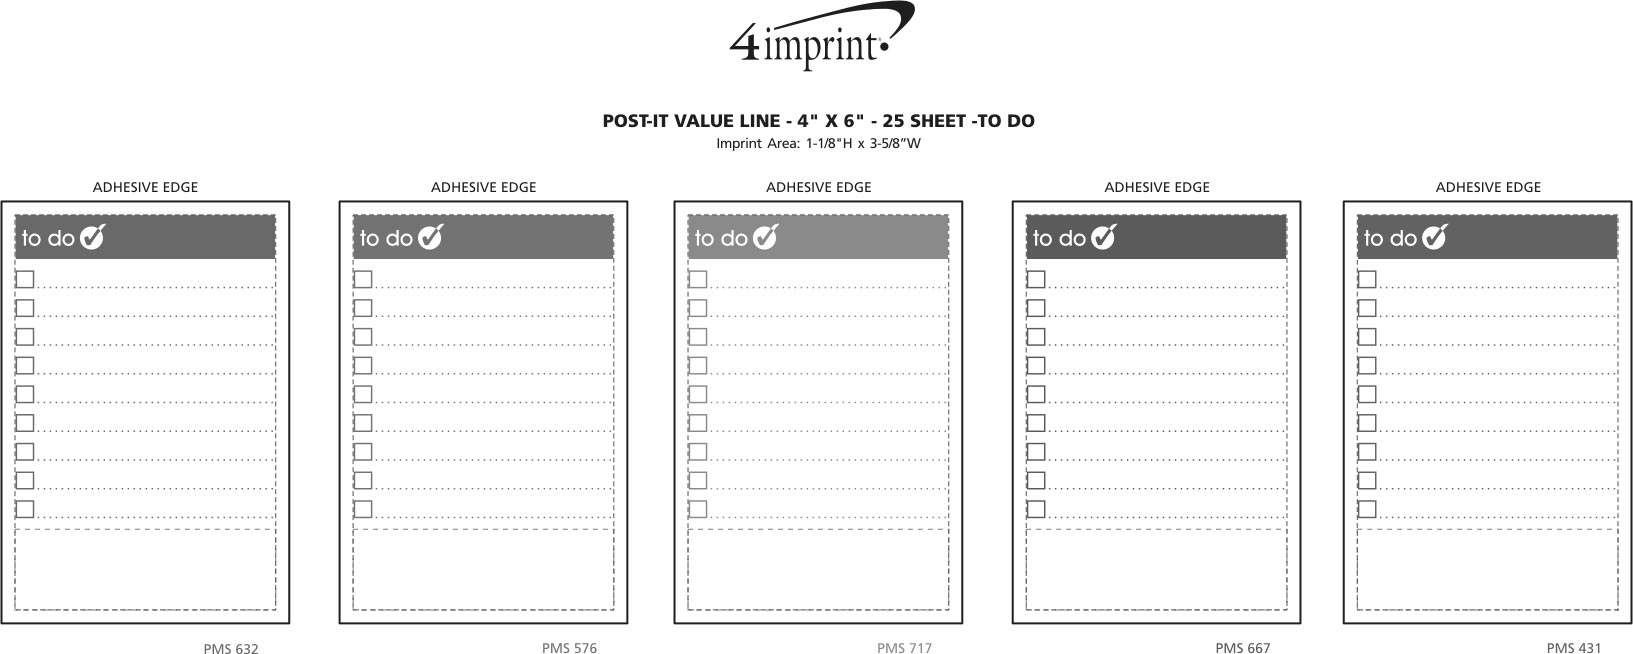 Imprint Area of Post-it® Notes - 6" x 4" - Exclusive - To Do - 25 Sheet